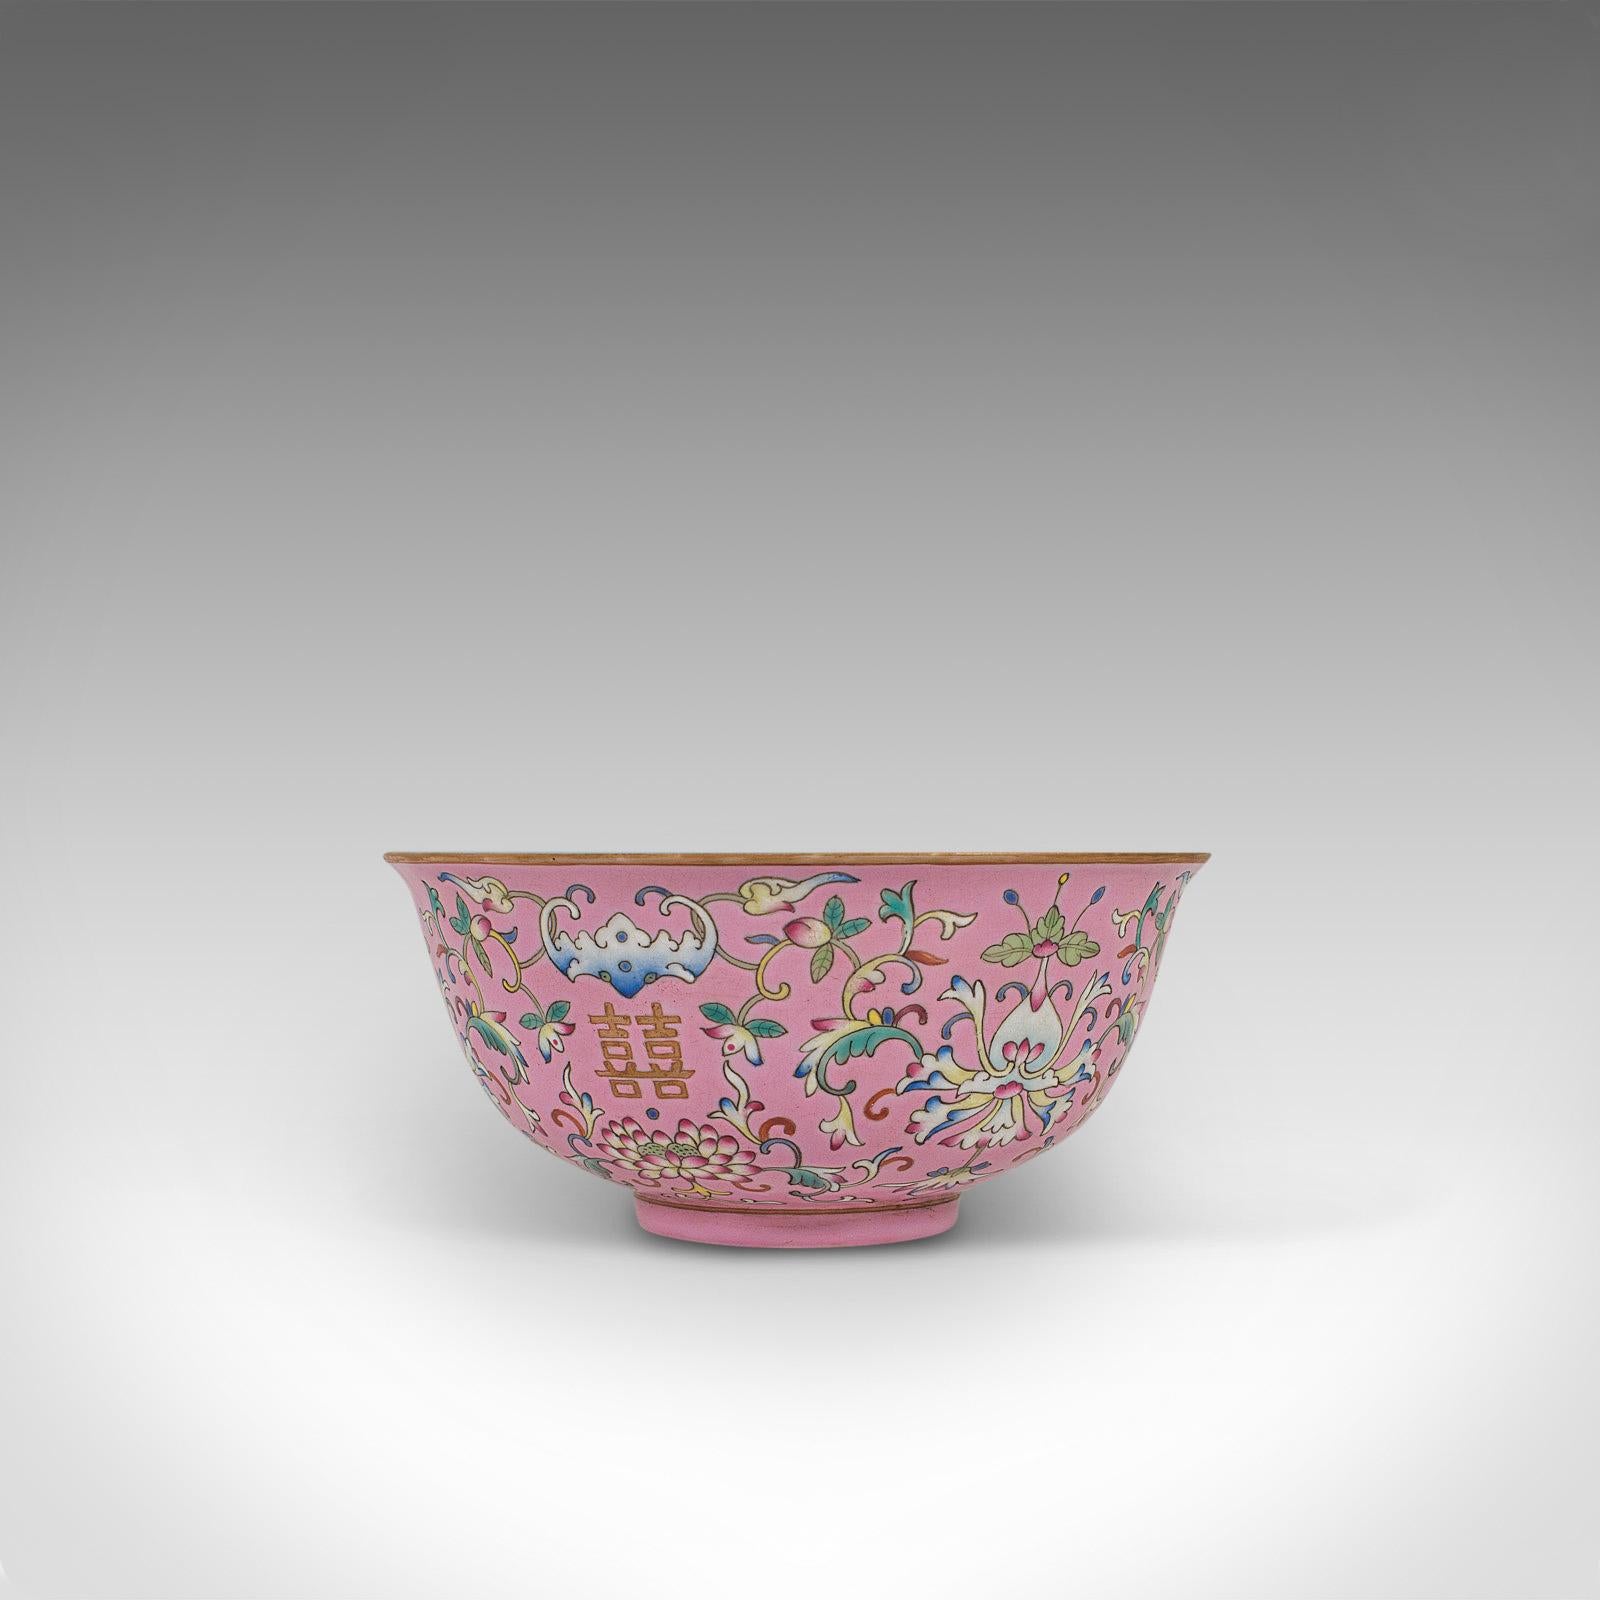 This is an antique decorative marriage bowl. A Chinese, ceramic ceremonial bonbon dish, dating to the late Victorian period, circa 1880.

Beautiful colors to this antique dish
Superb condition throughout
Ceramic thrown into a wonderful bowl